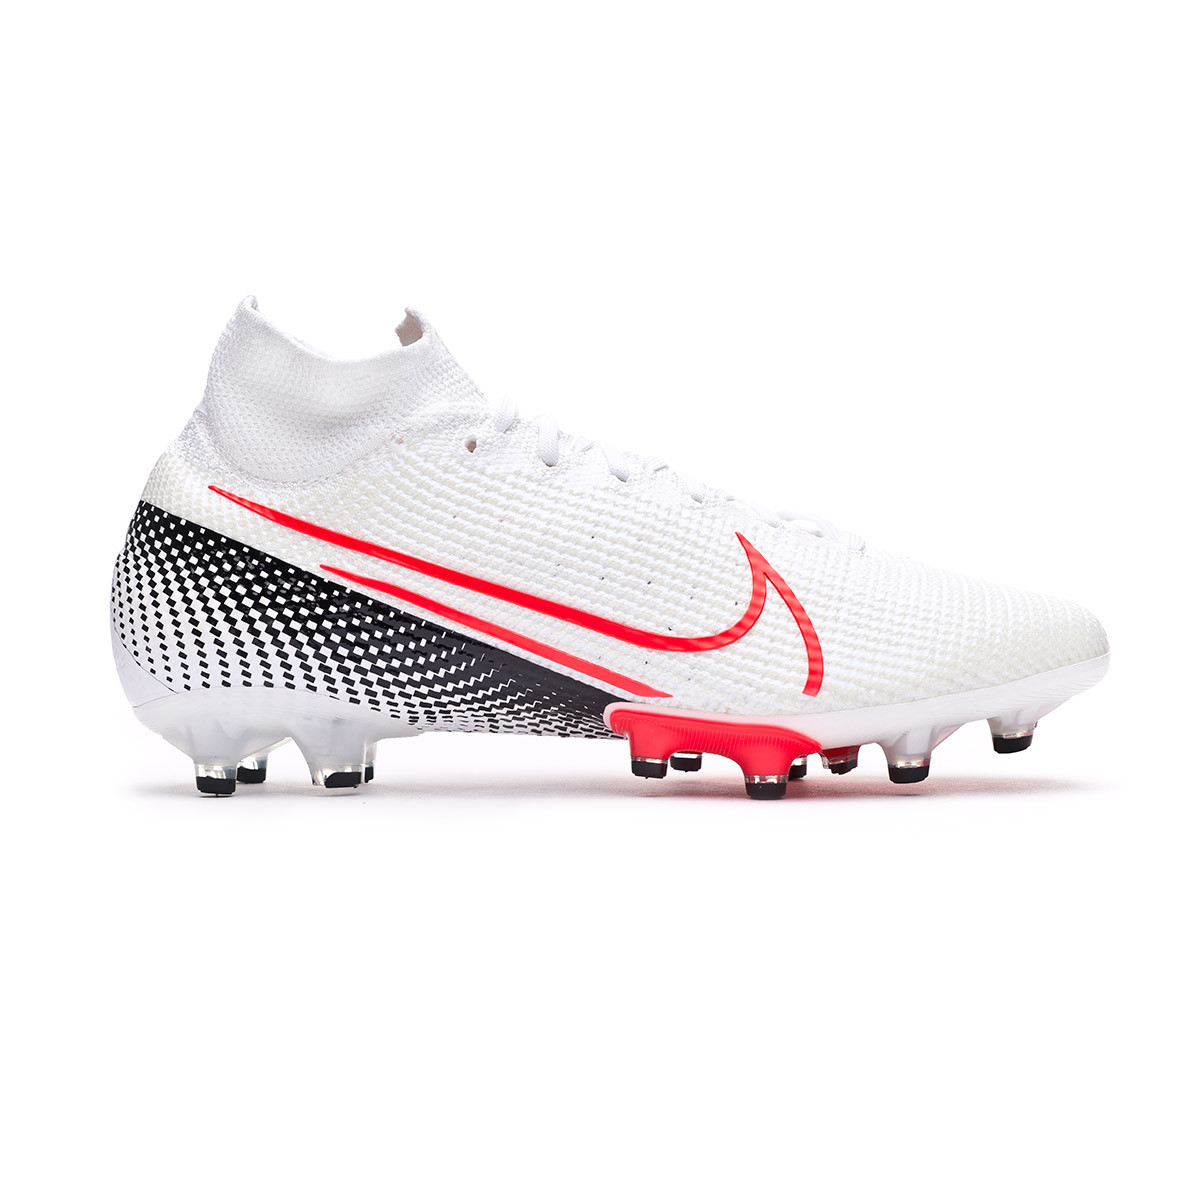 Nike Mercurial Superfly 7 Elite MDS TF Artificial Turf Soccer.